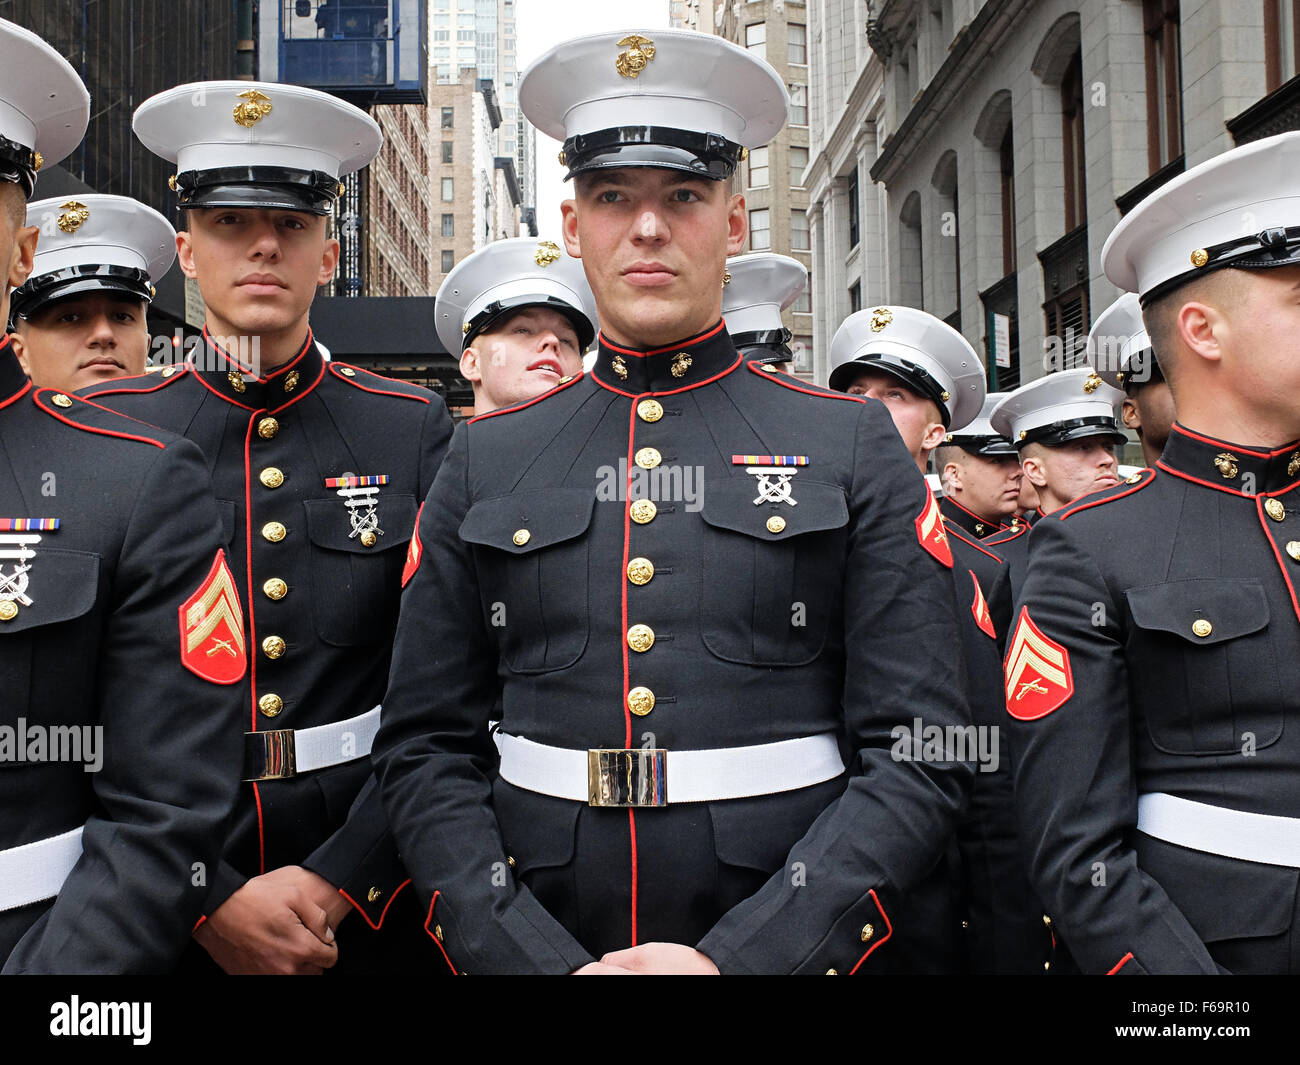 A group of United States Marines in uniform prior to the 2015 Stock